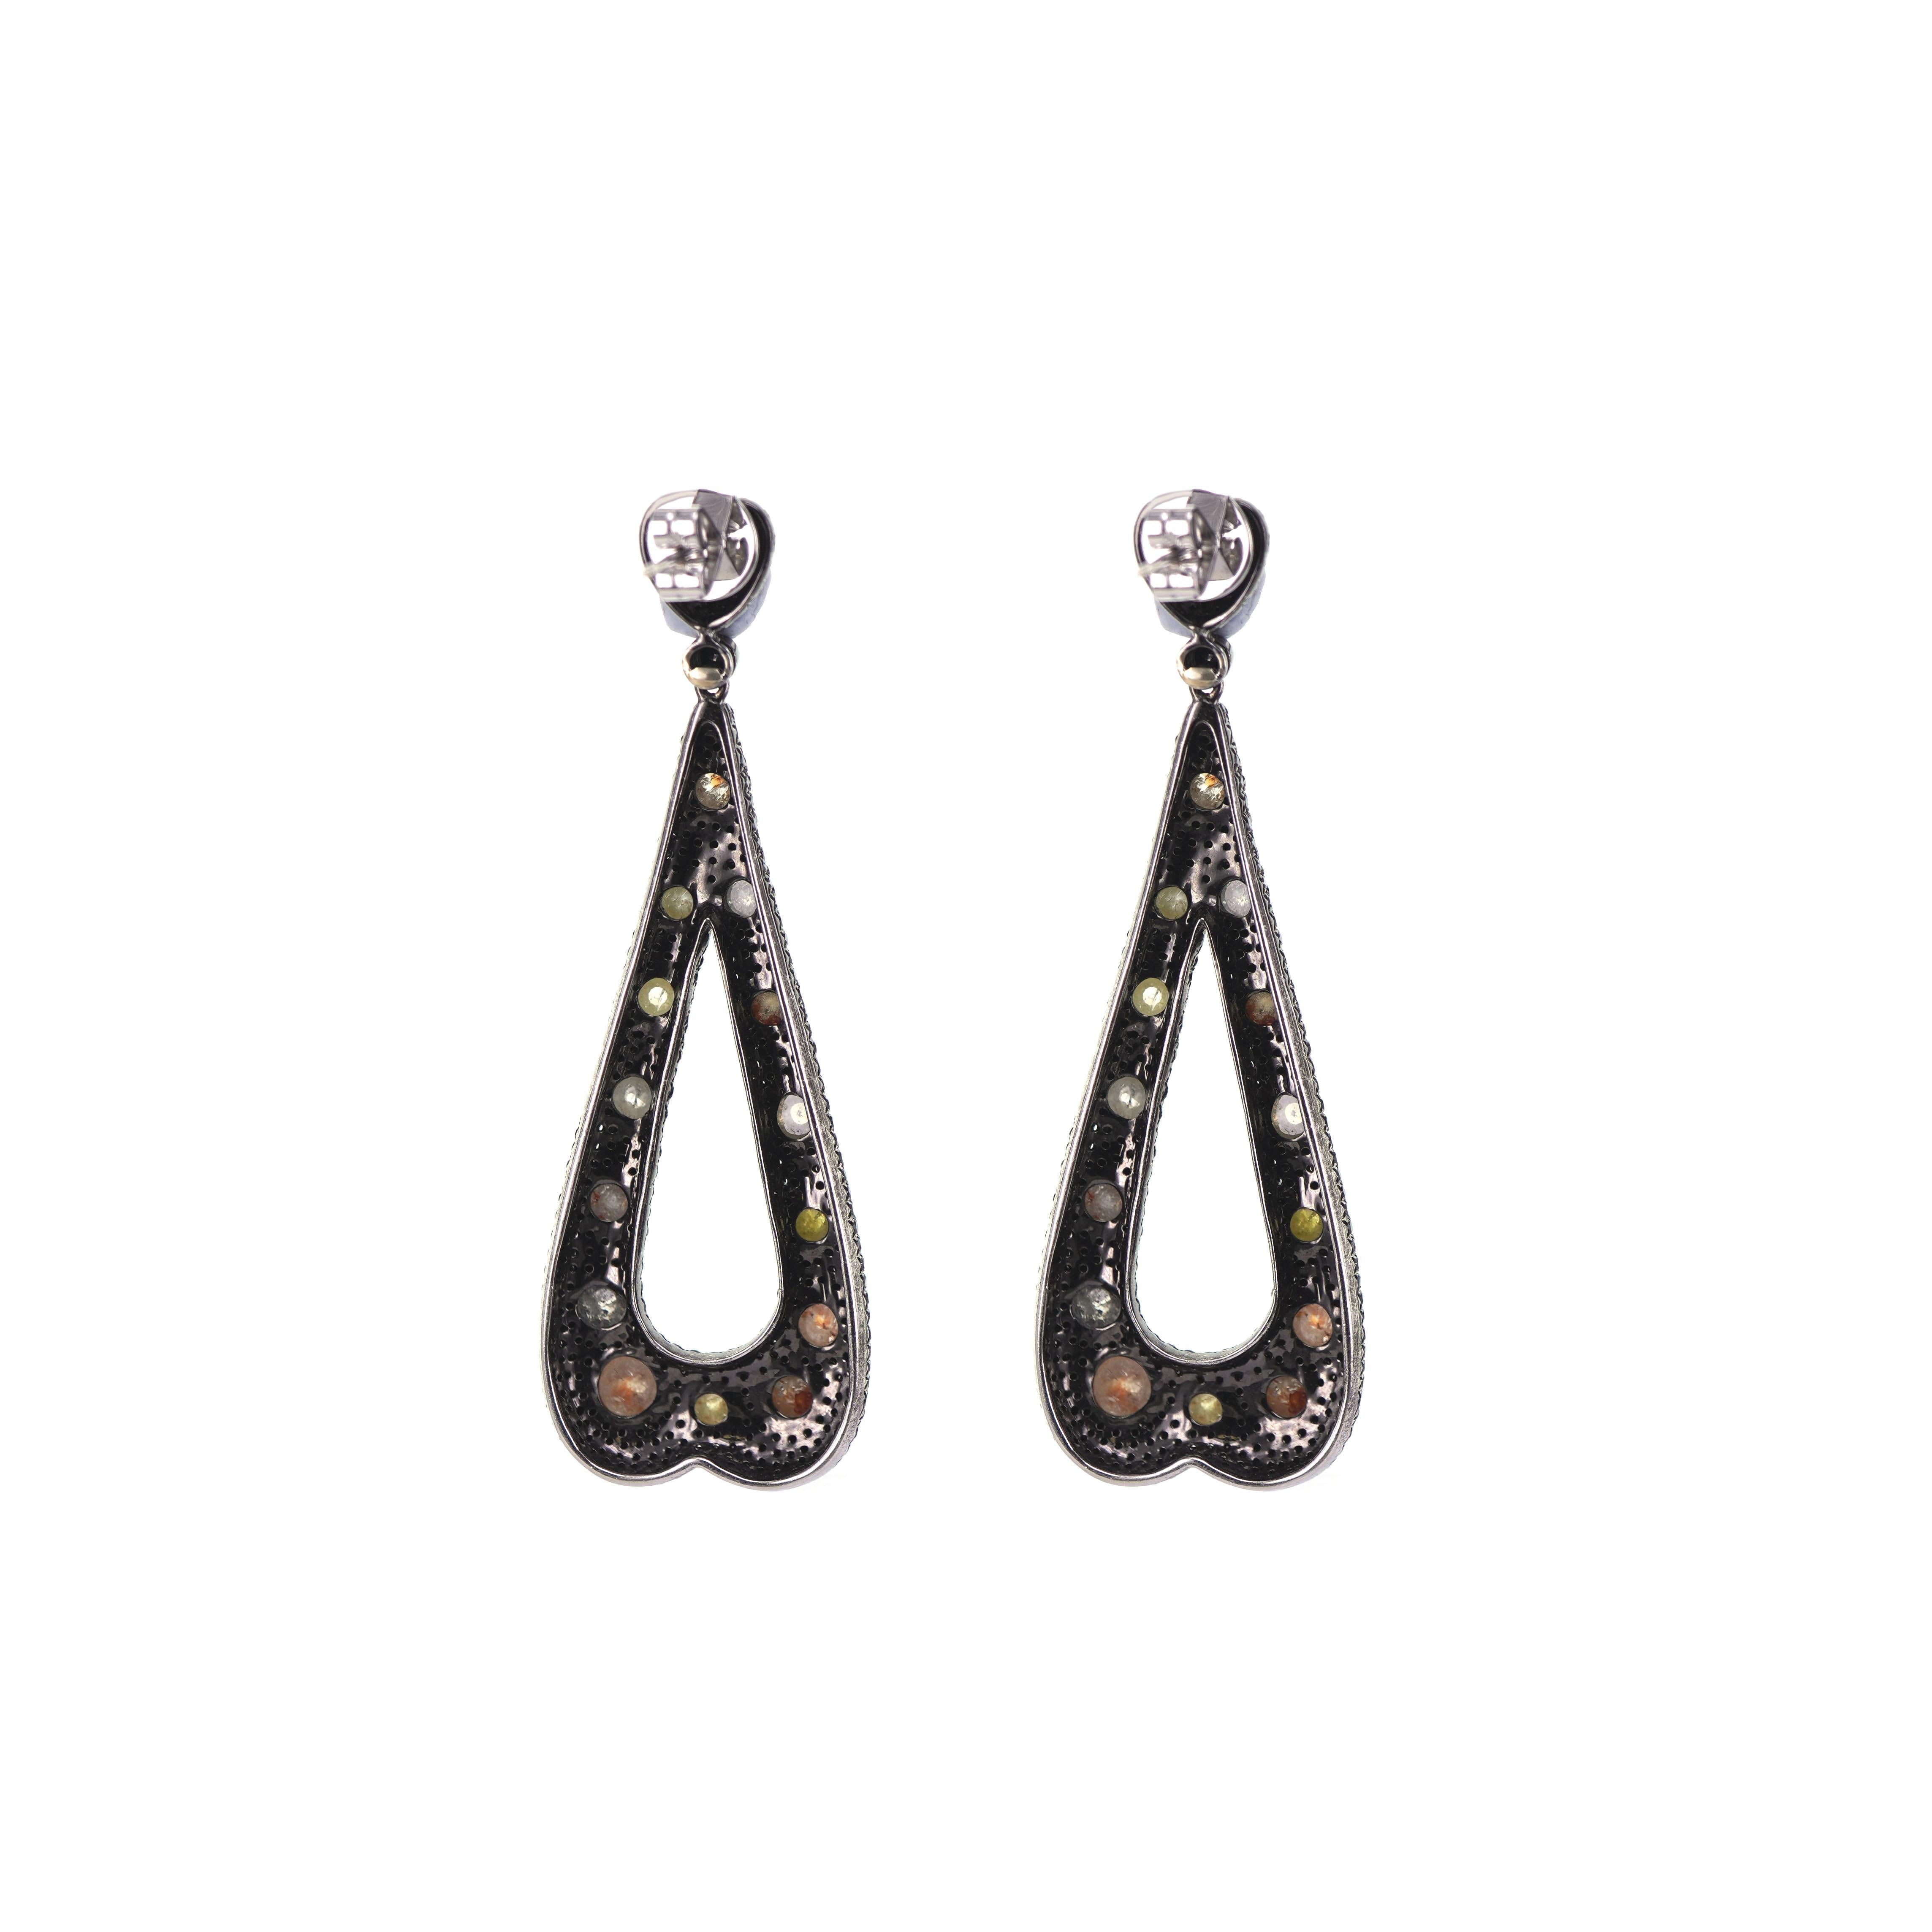 13.20 Carat of old Mughal Cut Diamond are set with 6.86 carat of Deep Black Diamond. The earring is made in 18 K Gold and has a very antique and old look about it. The total gold used in the earring is 28.41 grams which give it a nice heavy feel. 